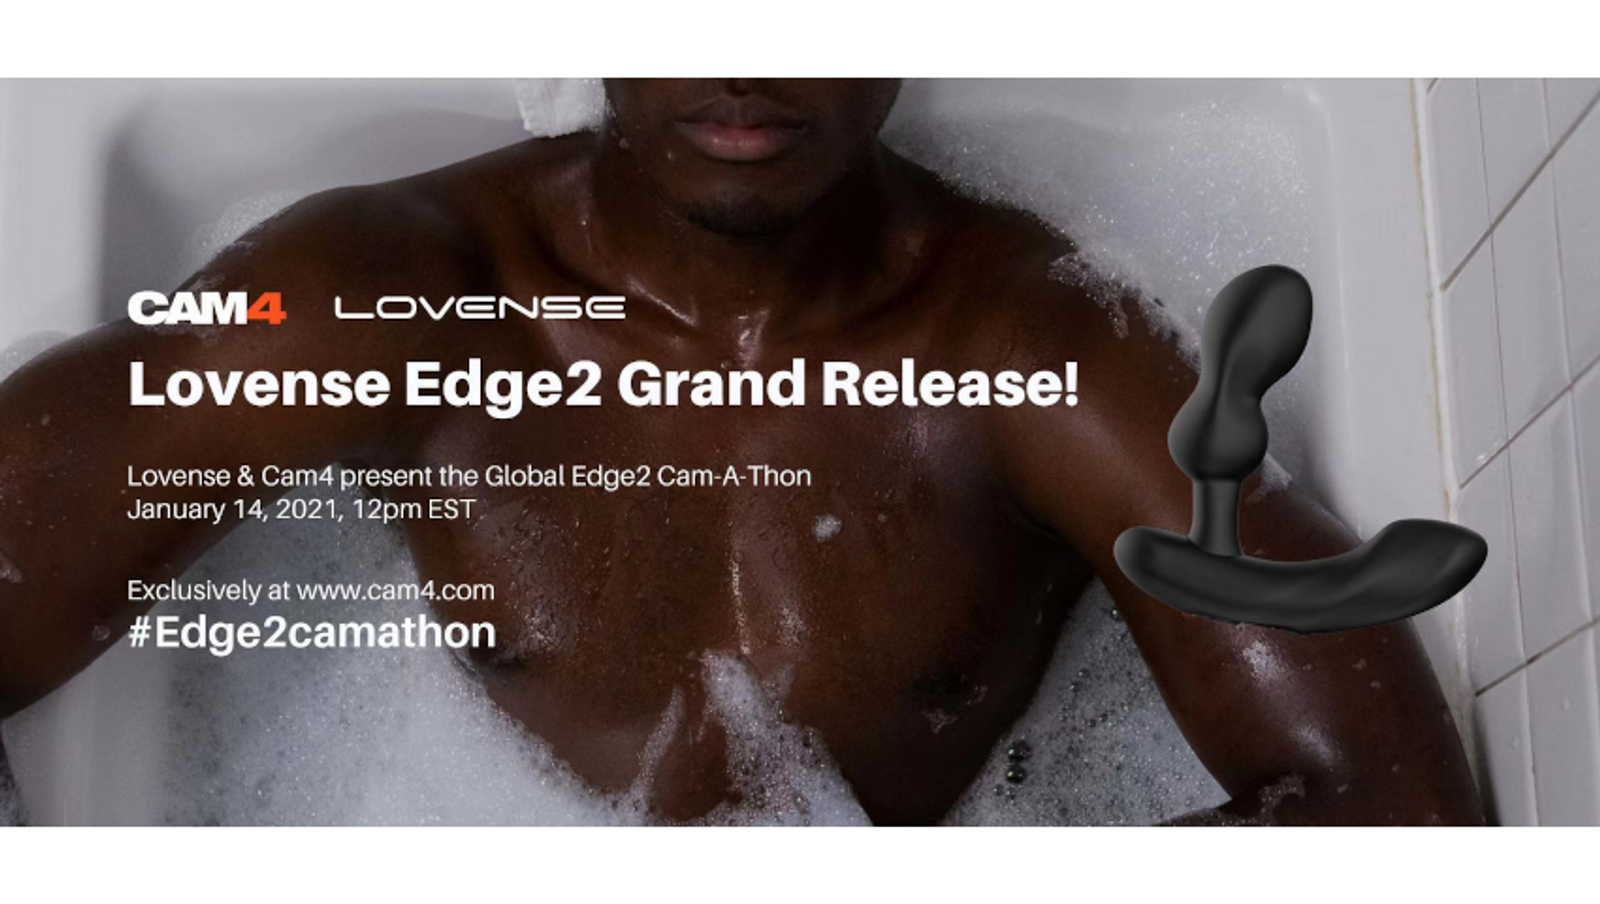 Lovense Partners With Cam4 on Lovense Edge2 Release